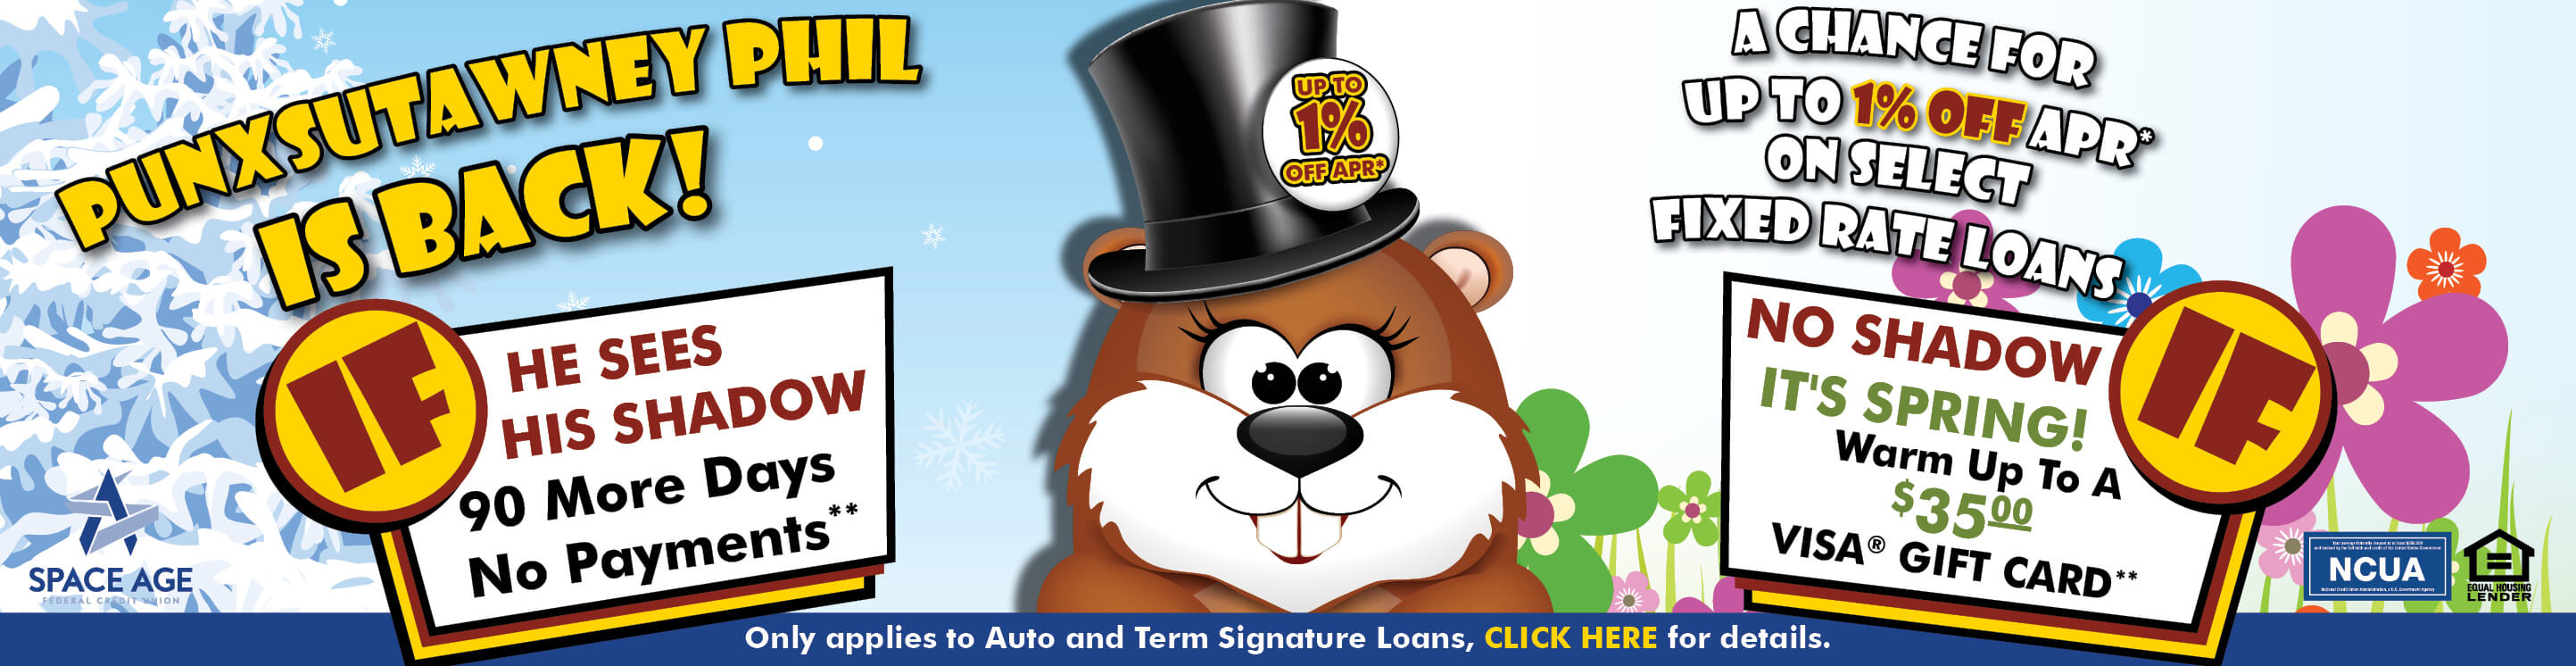 Punxsutawney Phil Decides! A chance for up to 1% off APR* on select fixed rate loans and...he didn't see his shadow! It's Spring so 'Phil' it up with a $35 gas card. Only applies to auto and term signature loans. More details.